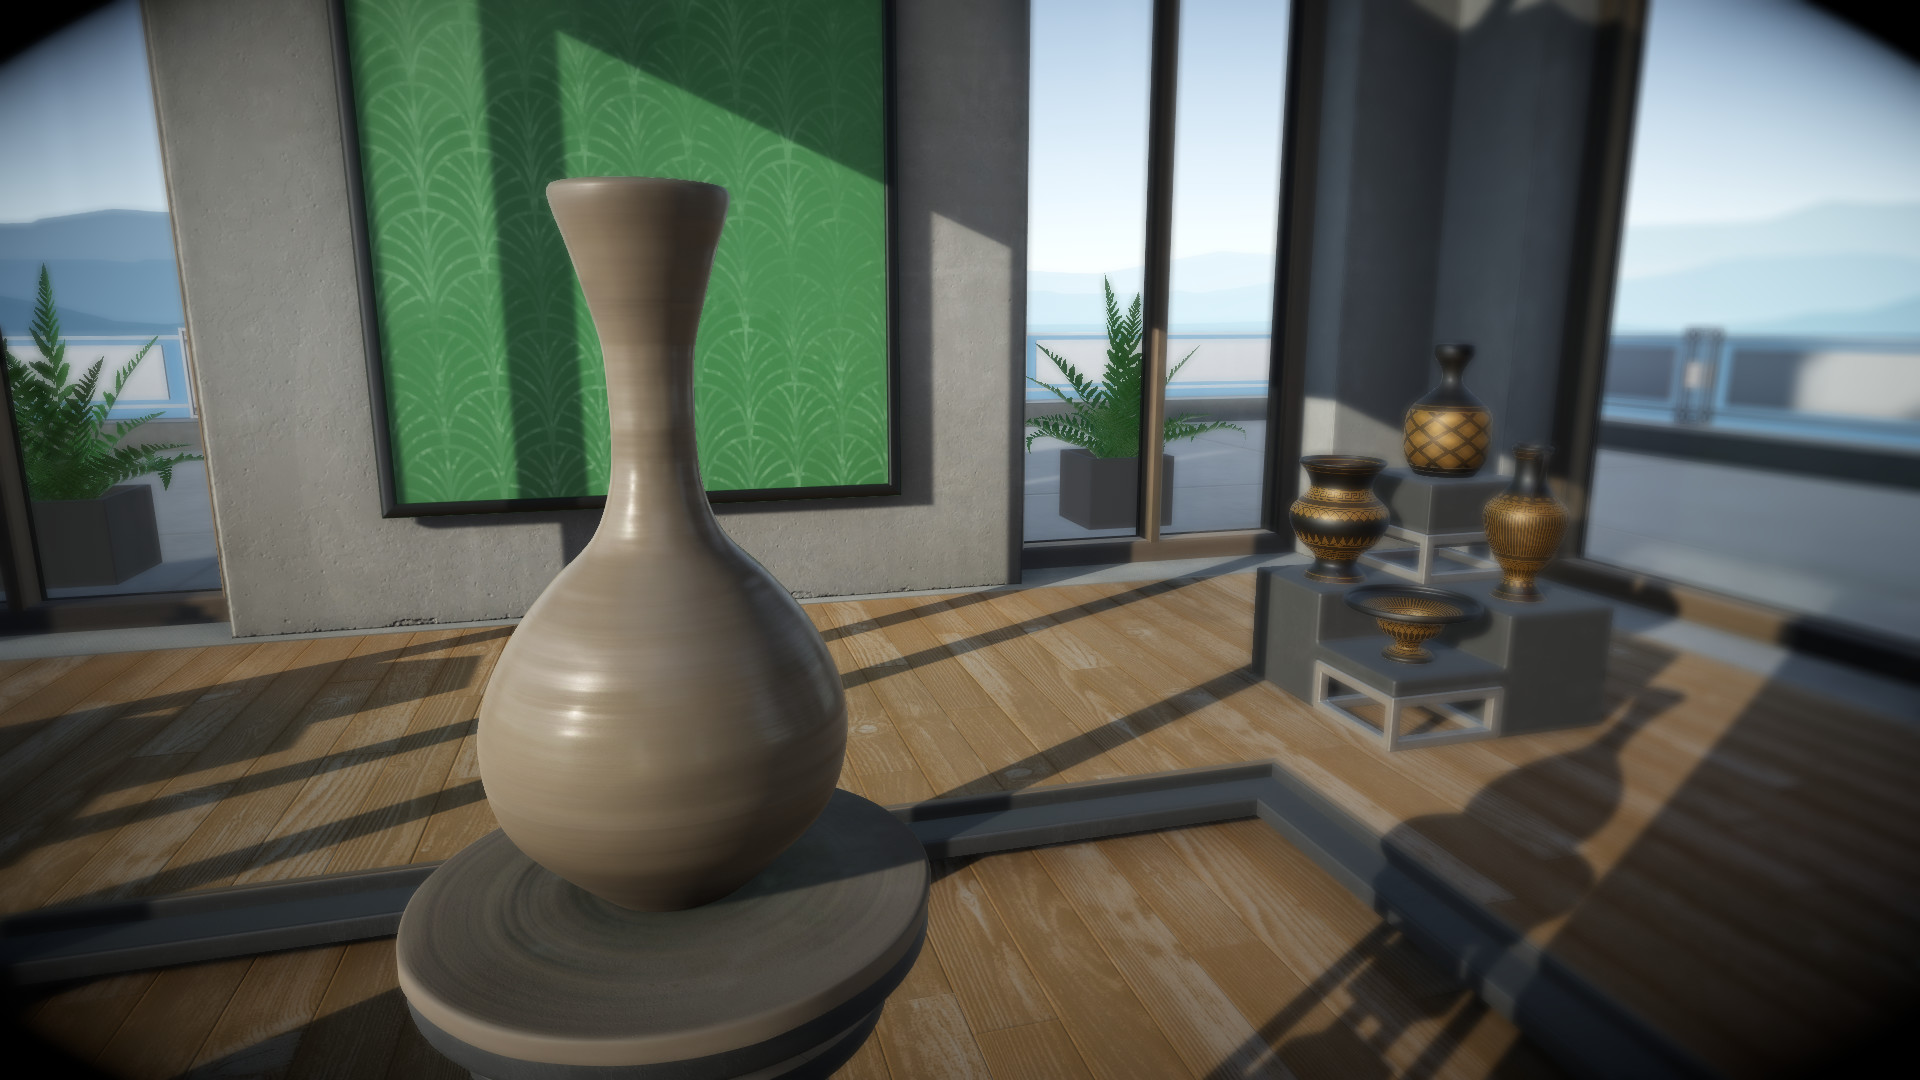 Let's Create! Pottery VR screenshot